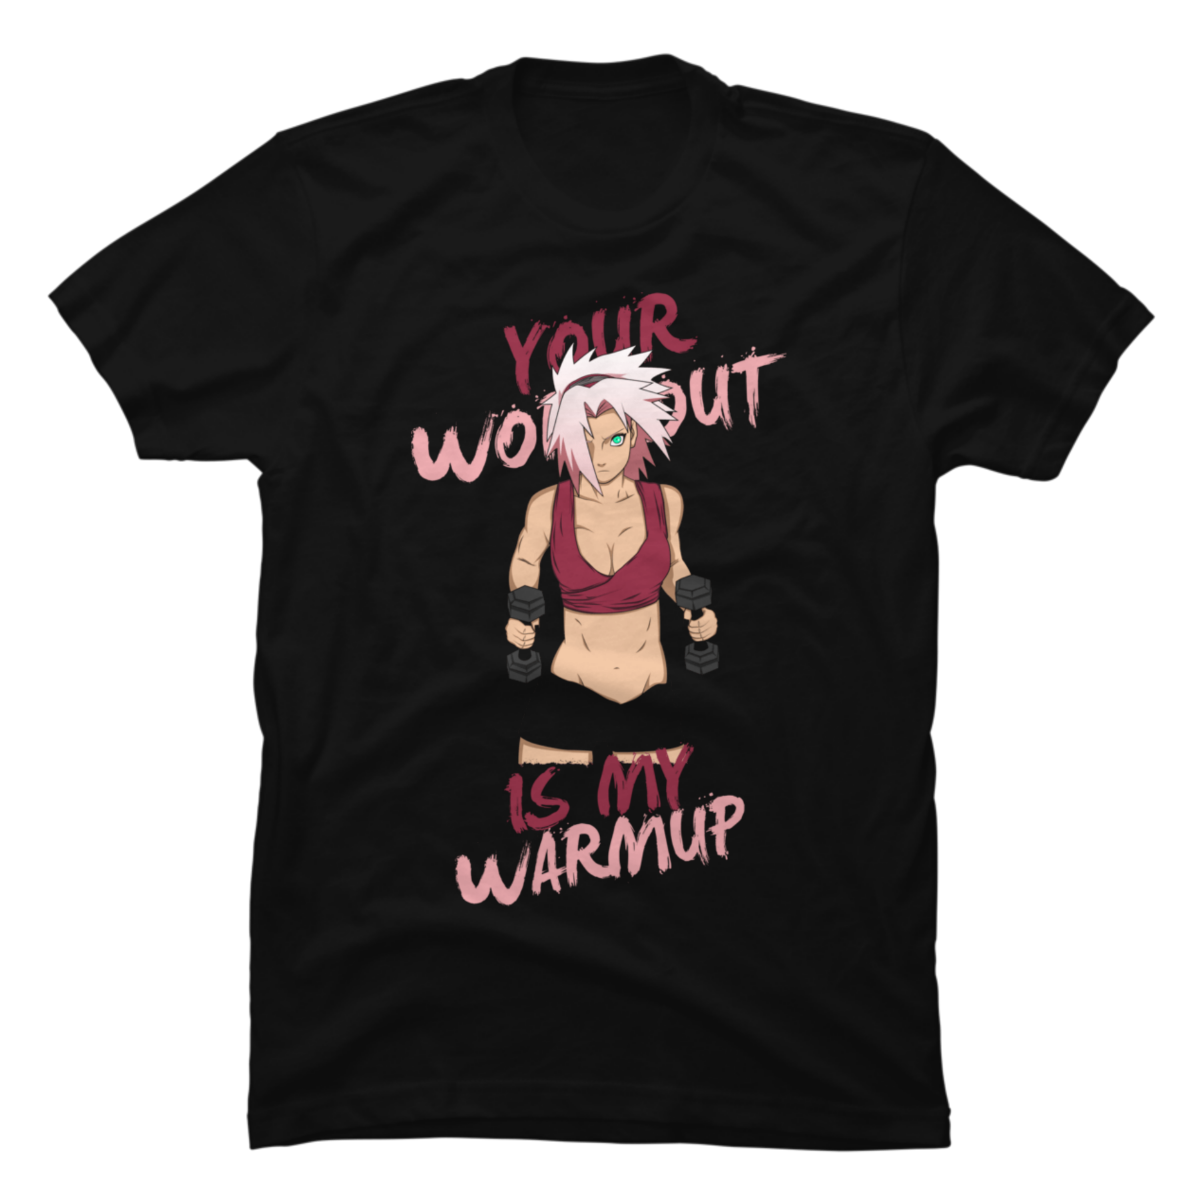 my warmup is your workout t shirt